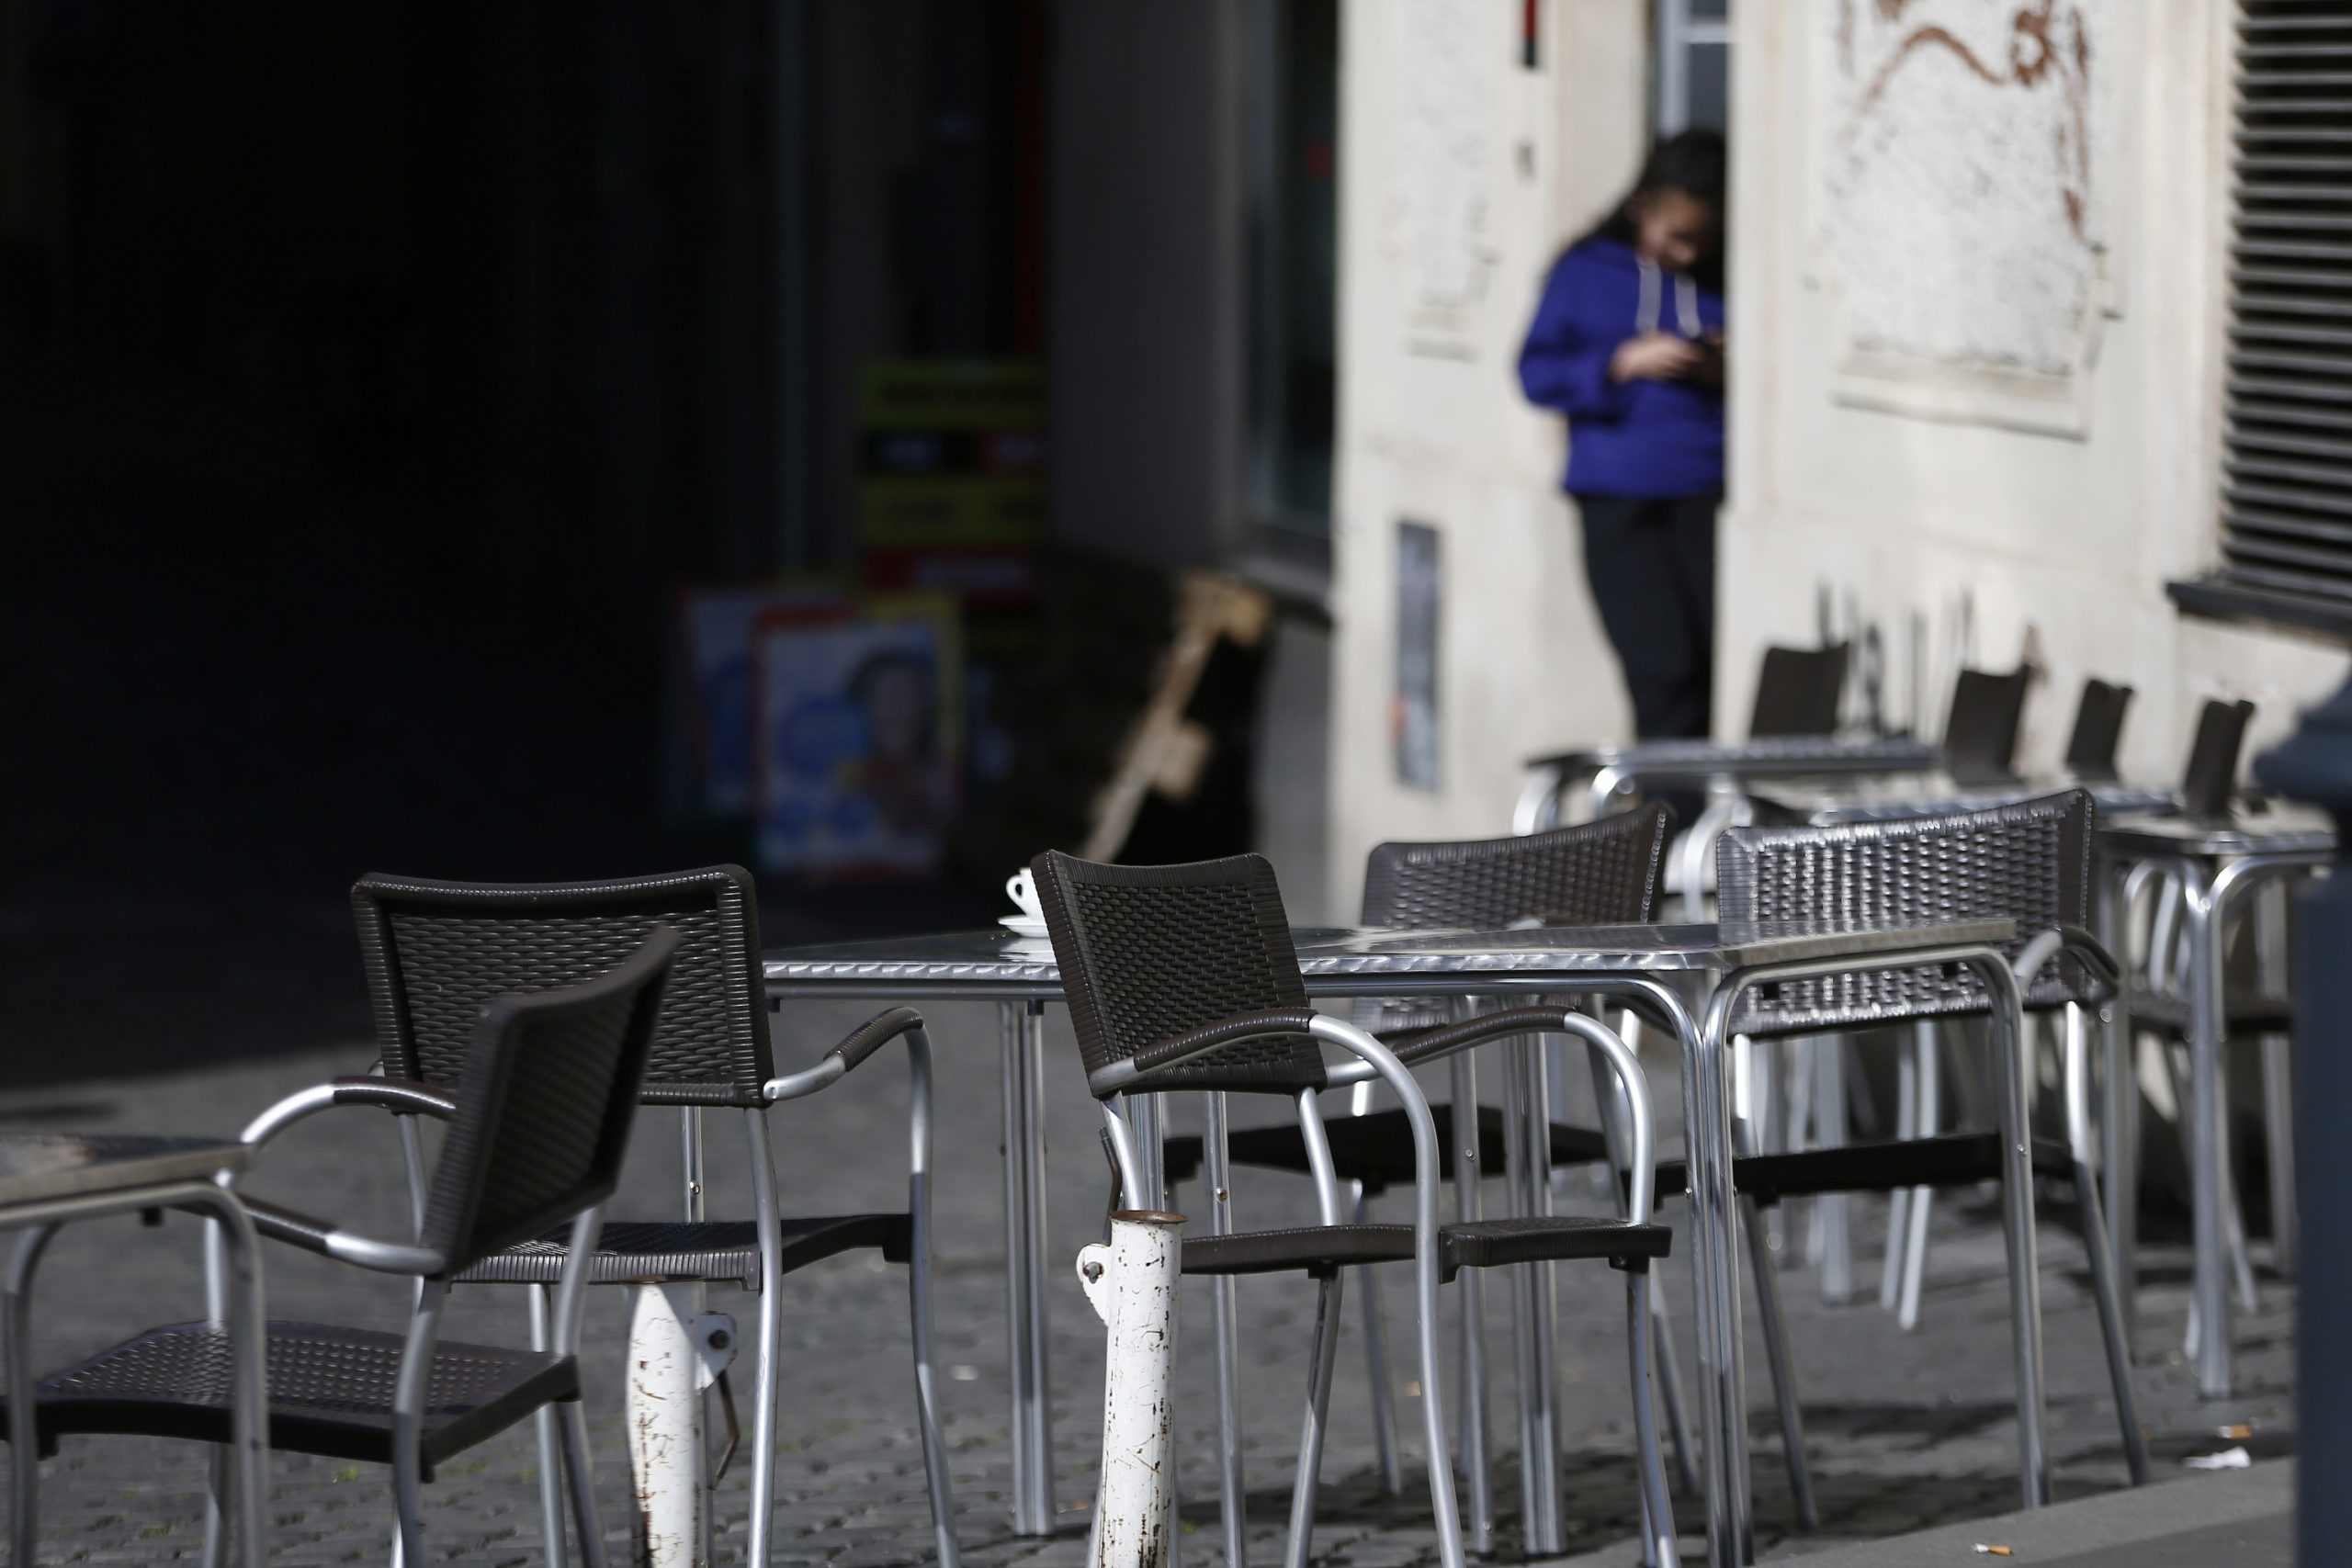 Chairs are empty at a cafe in Largo Argentina square amid growing concern about the spread of a new coronavirus in Rome Saturday, March 7, 2020. Italy is taking an almighty hit to its already weak economy from being the focal point of the coronavirus emergency in Europe. (Cecilia Fabiano/LaPresse via AP)